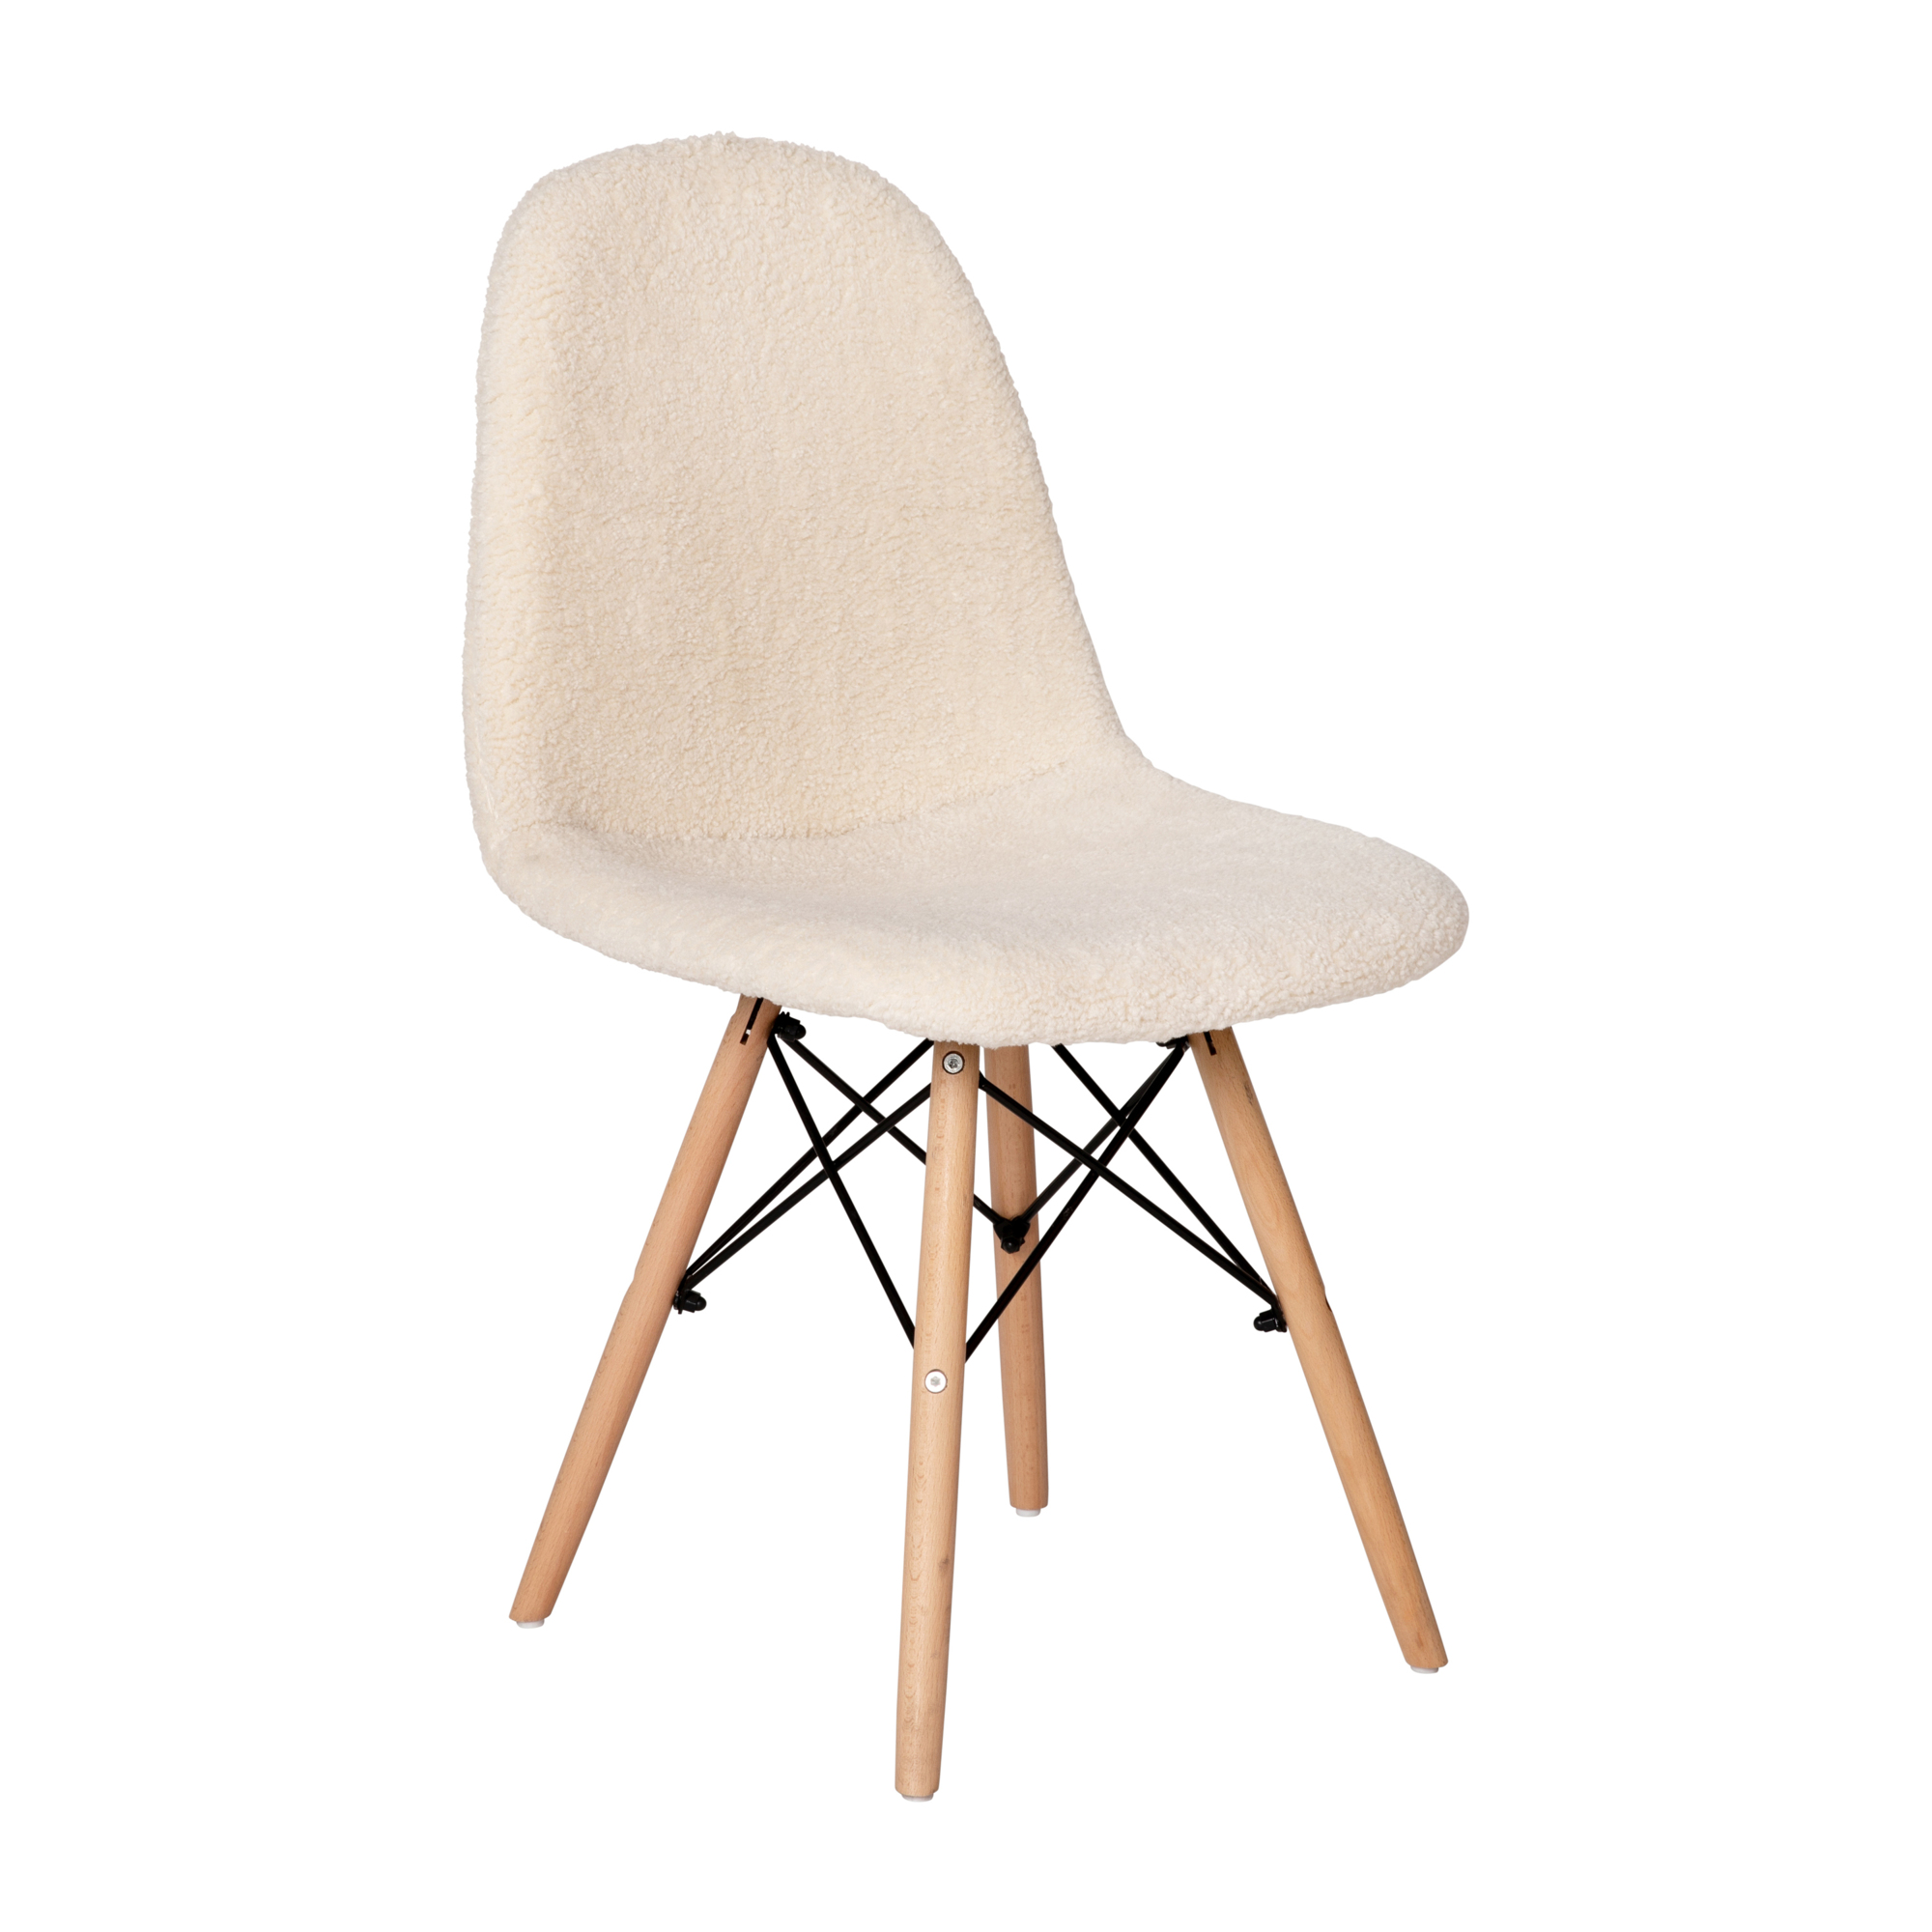 Flash Furniture, Off-White Faux Shearling Chair with Wood Legs, Primary Color Off White, Included (qty.) 1, Model DL10W